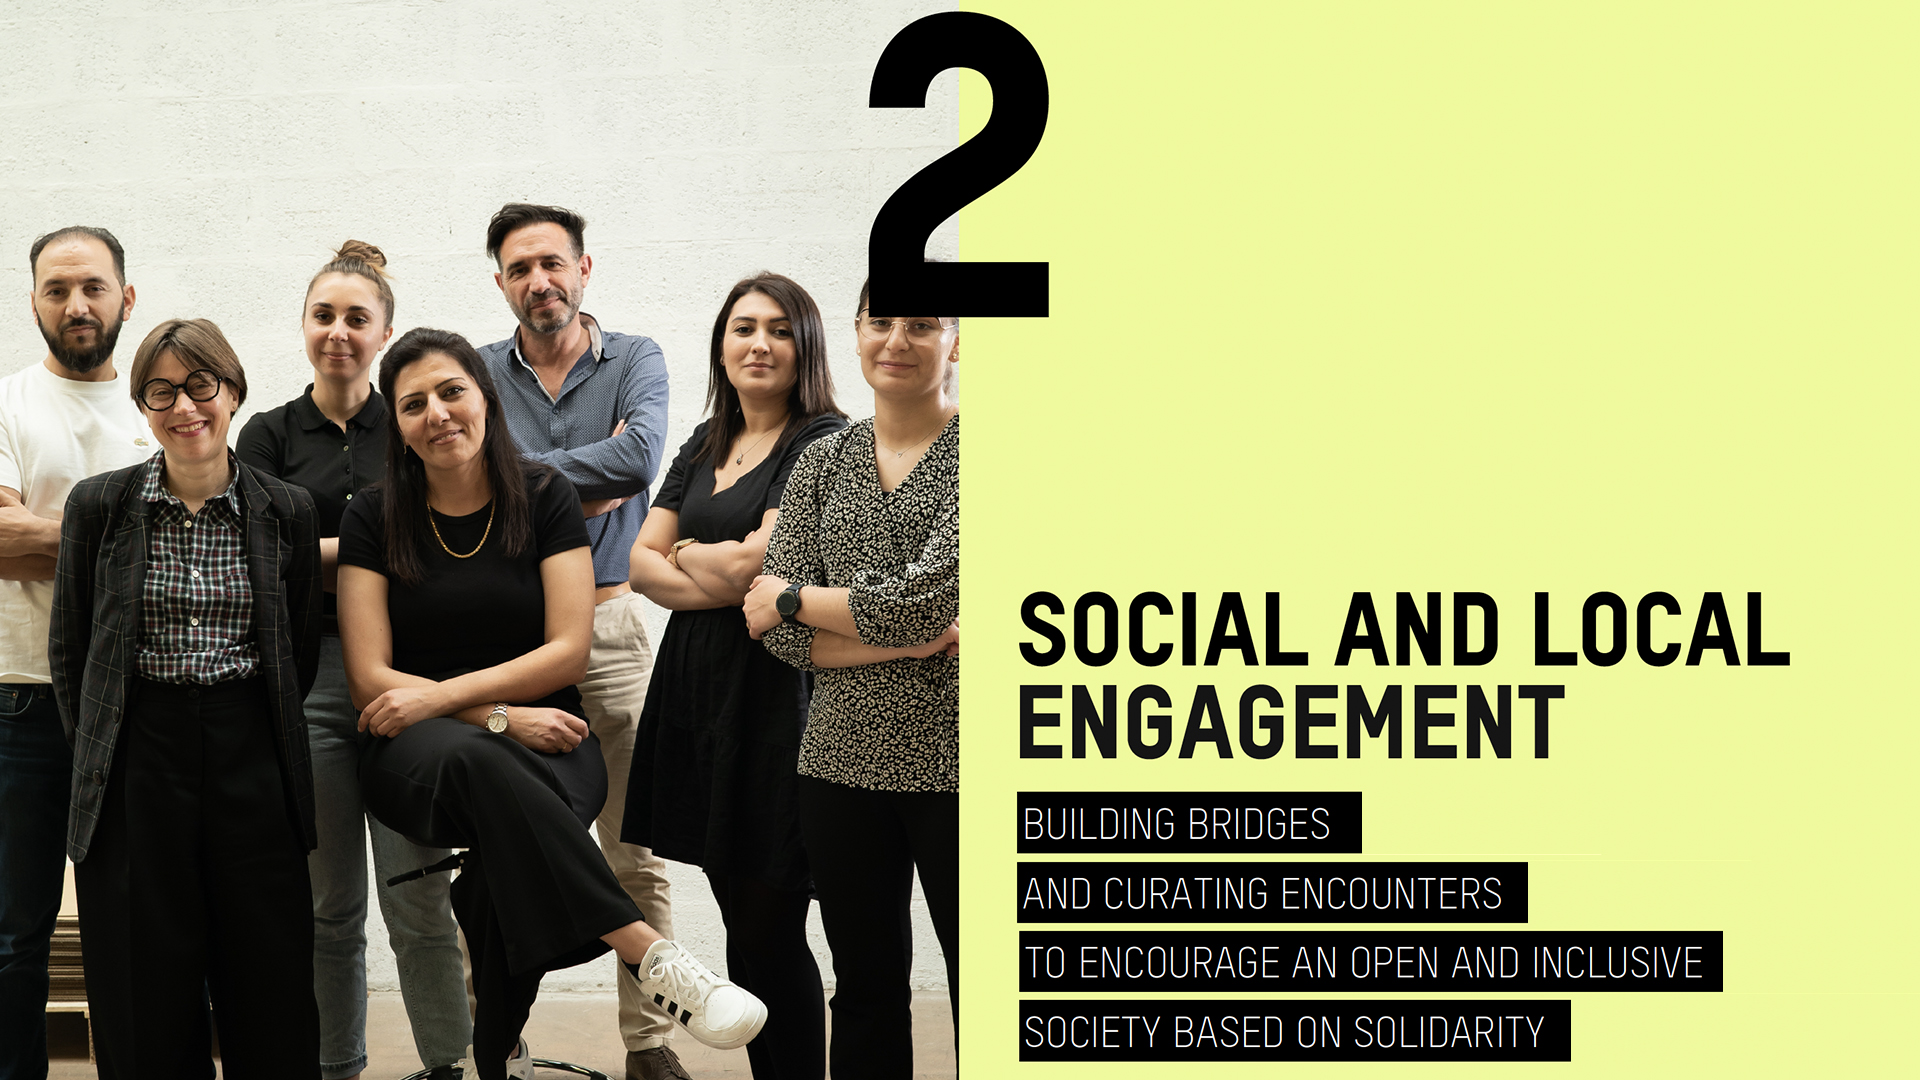 Social and local engagement